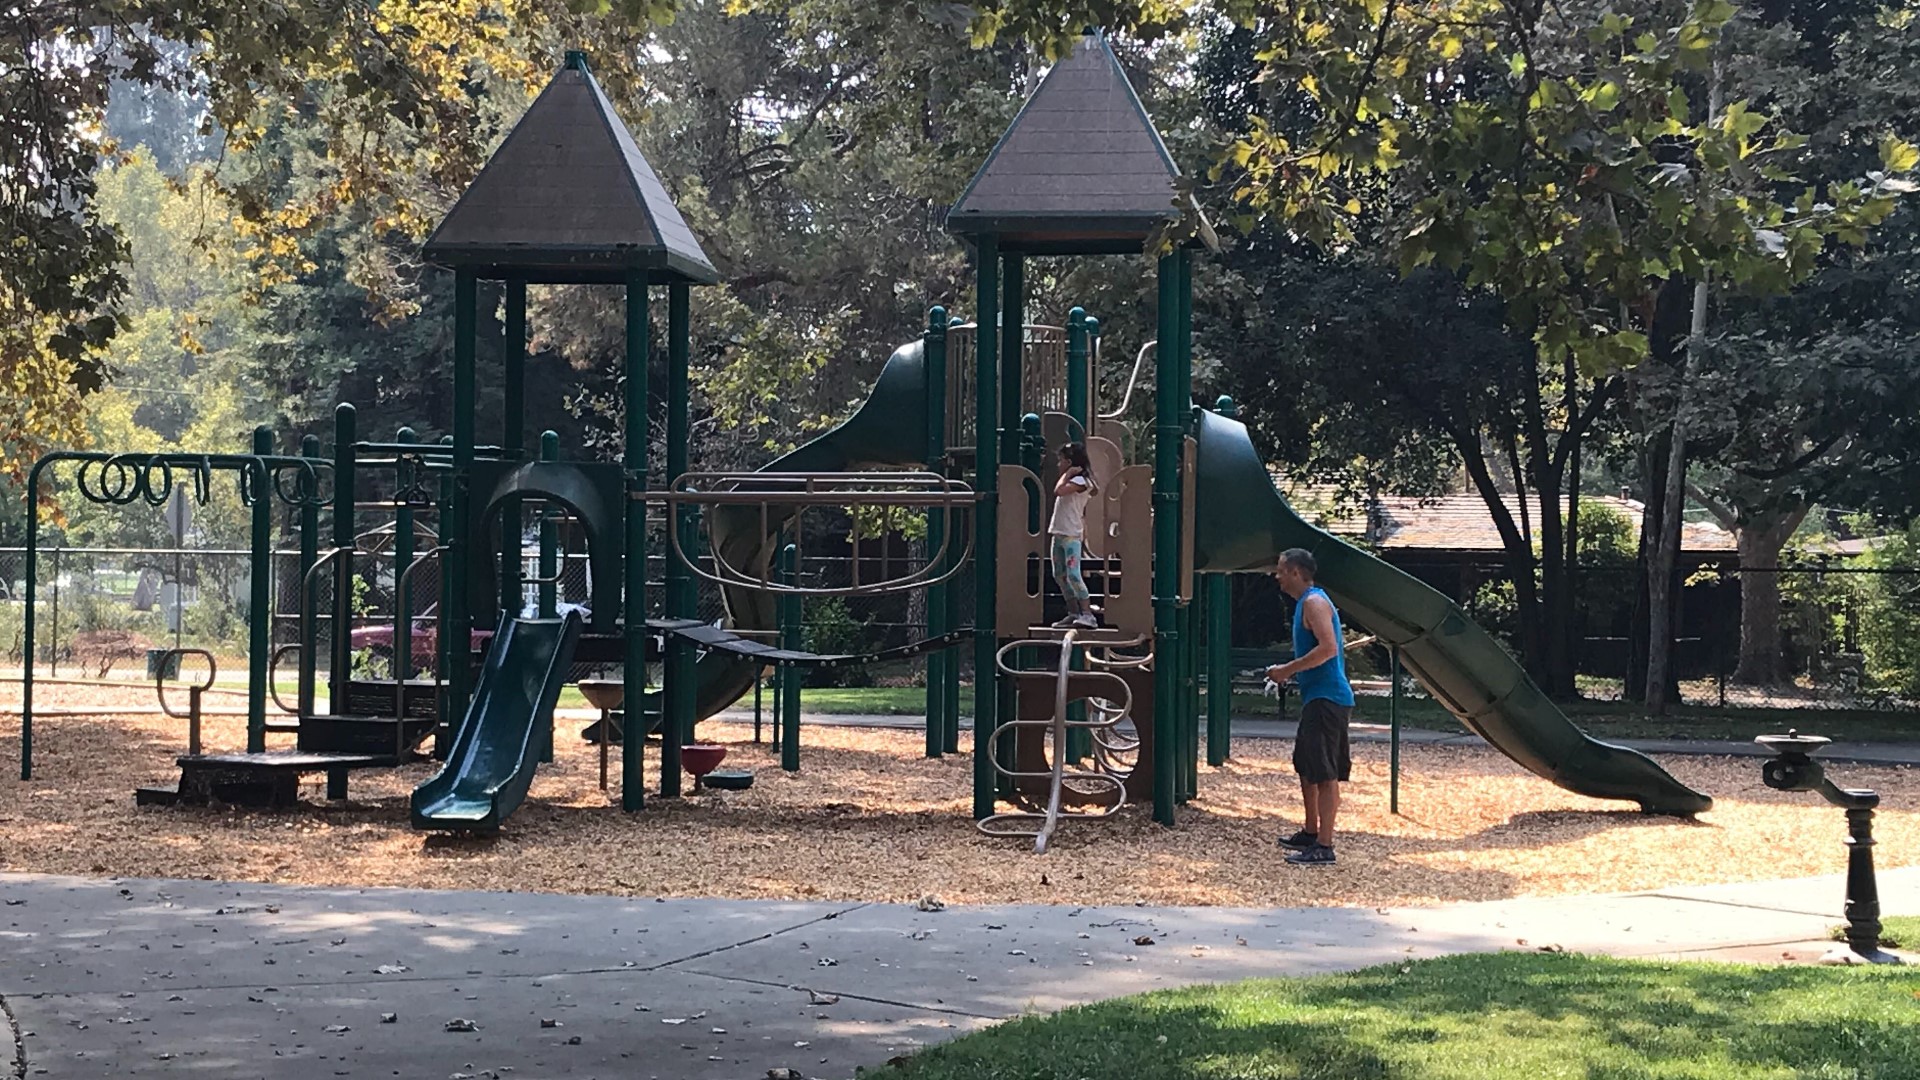 The parks and playgrounds are allowed to reopen with rules parents must follow, like making sure their kids are wearing masks.